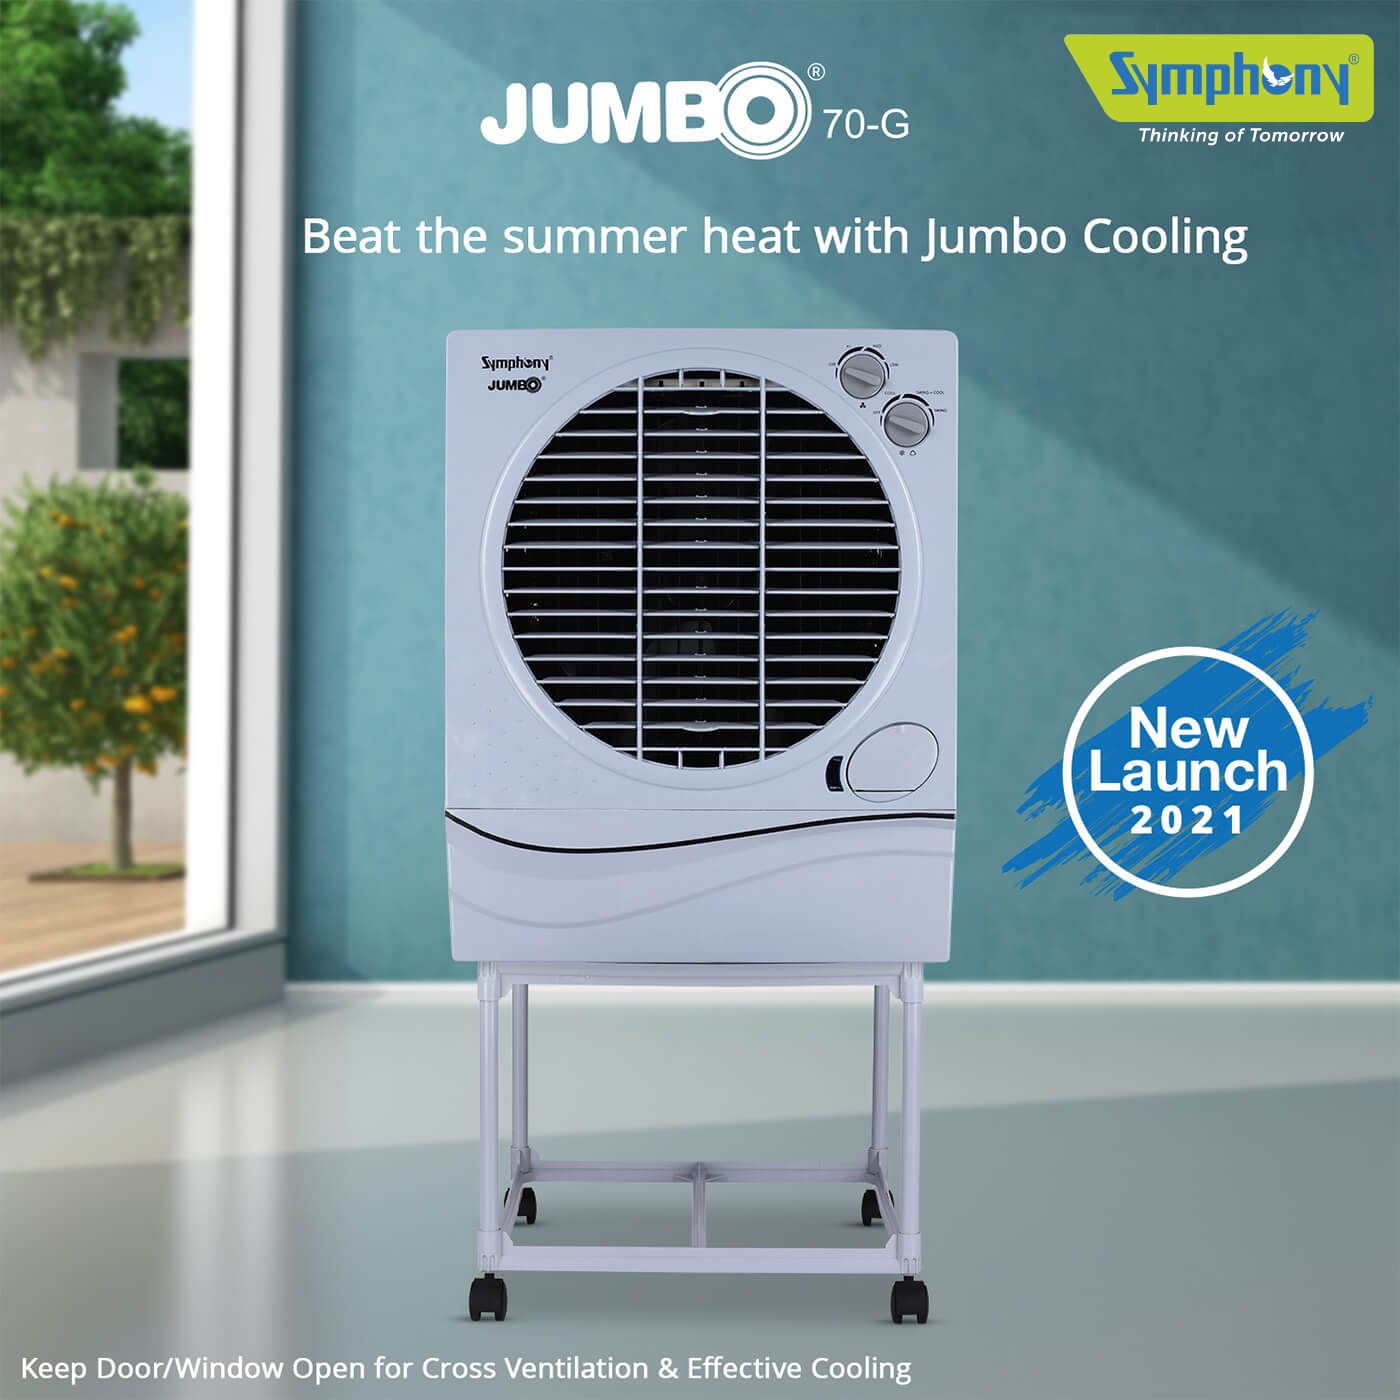 Distributor of Symphony Sumo Coolers in Indore